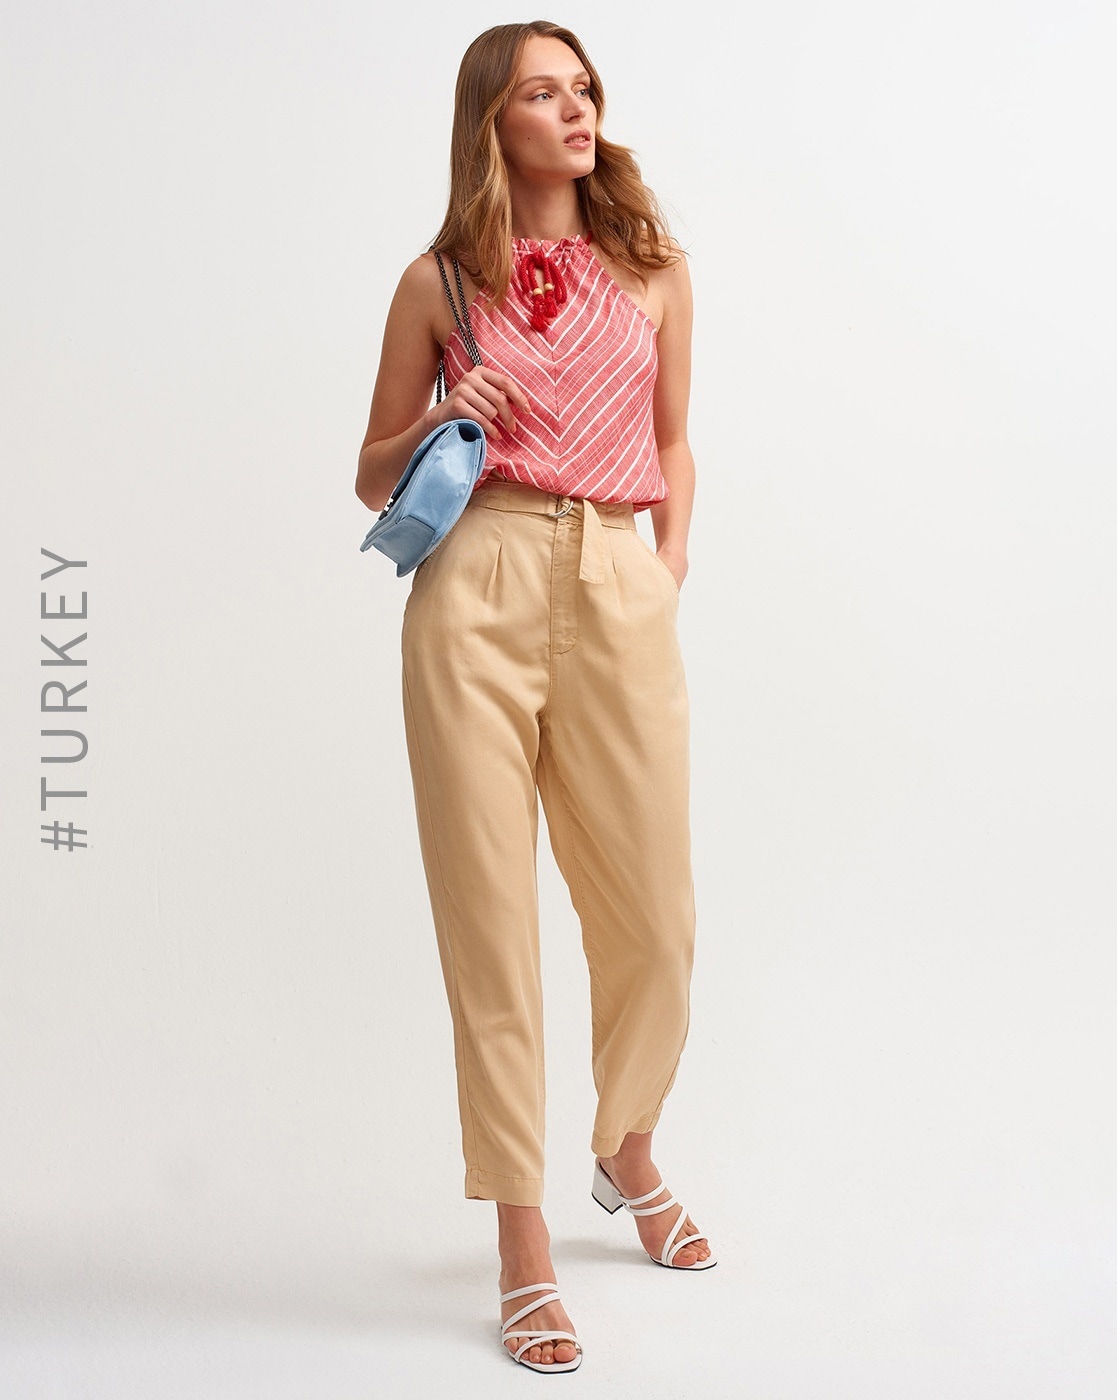 Buy Lavender Trousers  Pants for Women by Outryt Online  Ajiocom